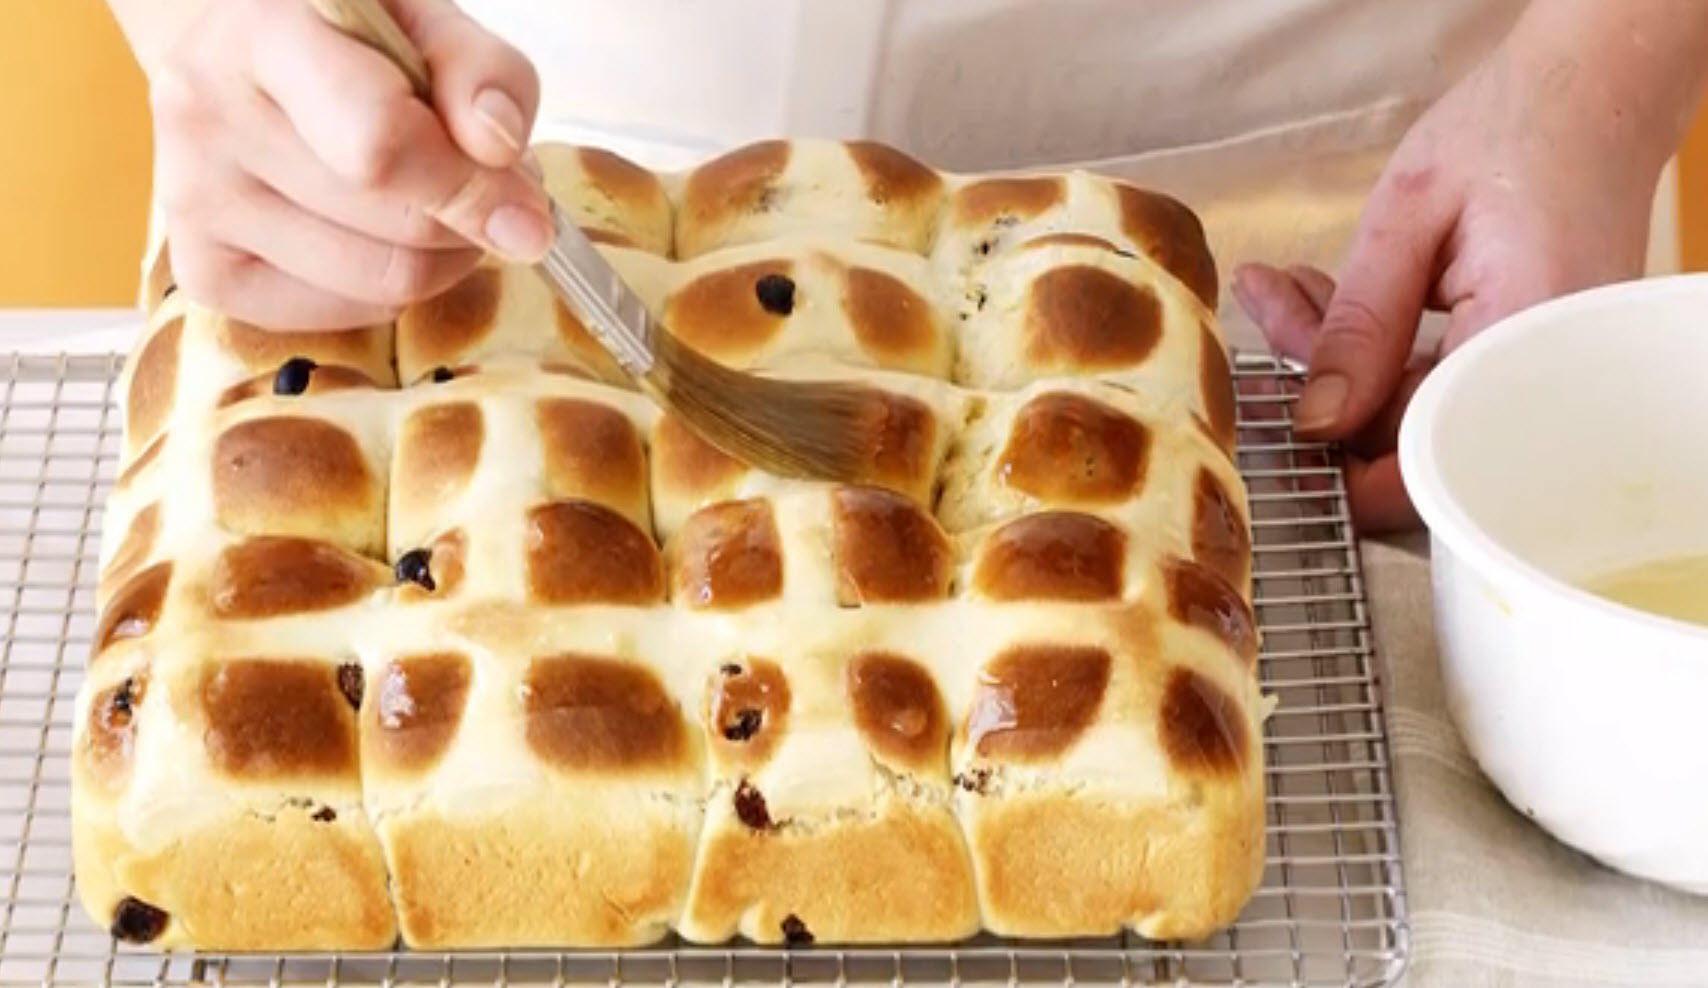 WATCH: How to make the perfect hot cross buns